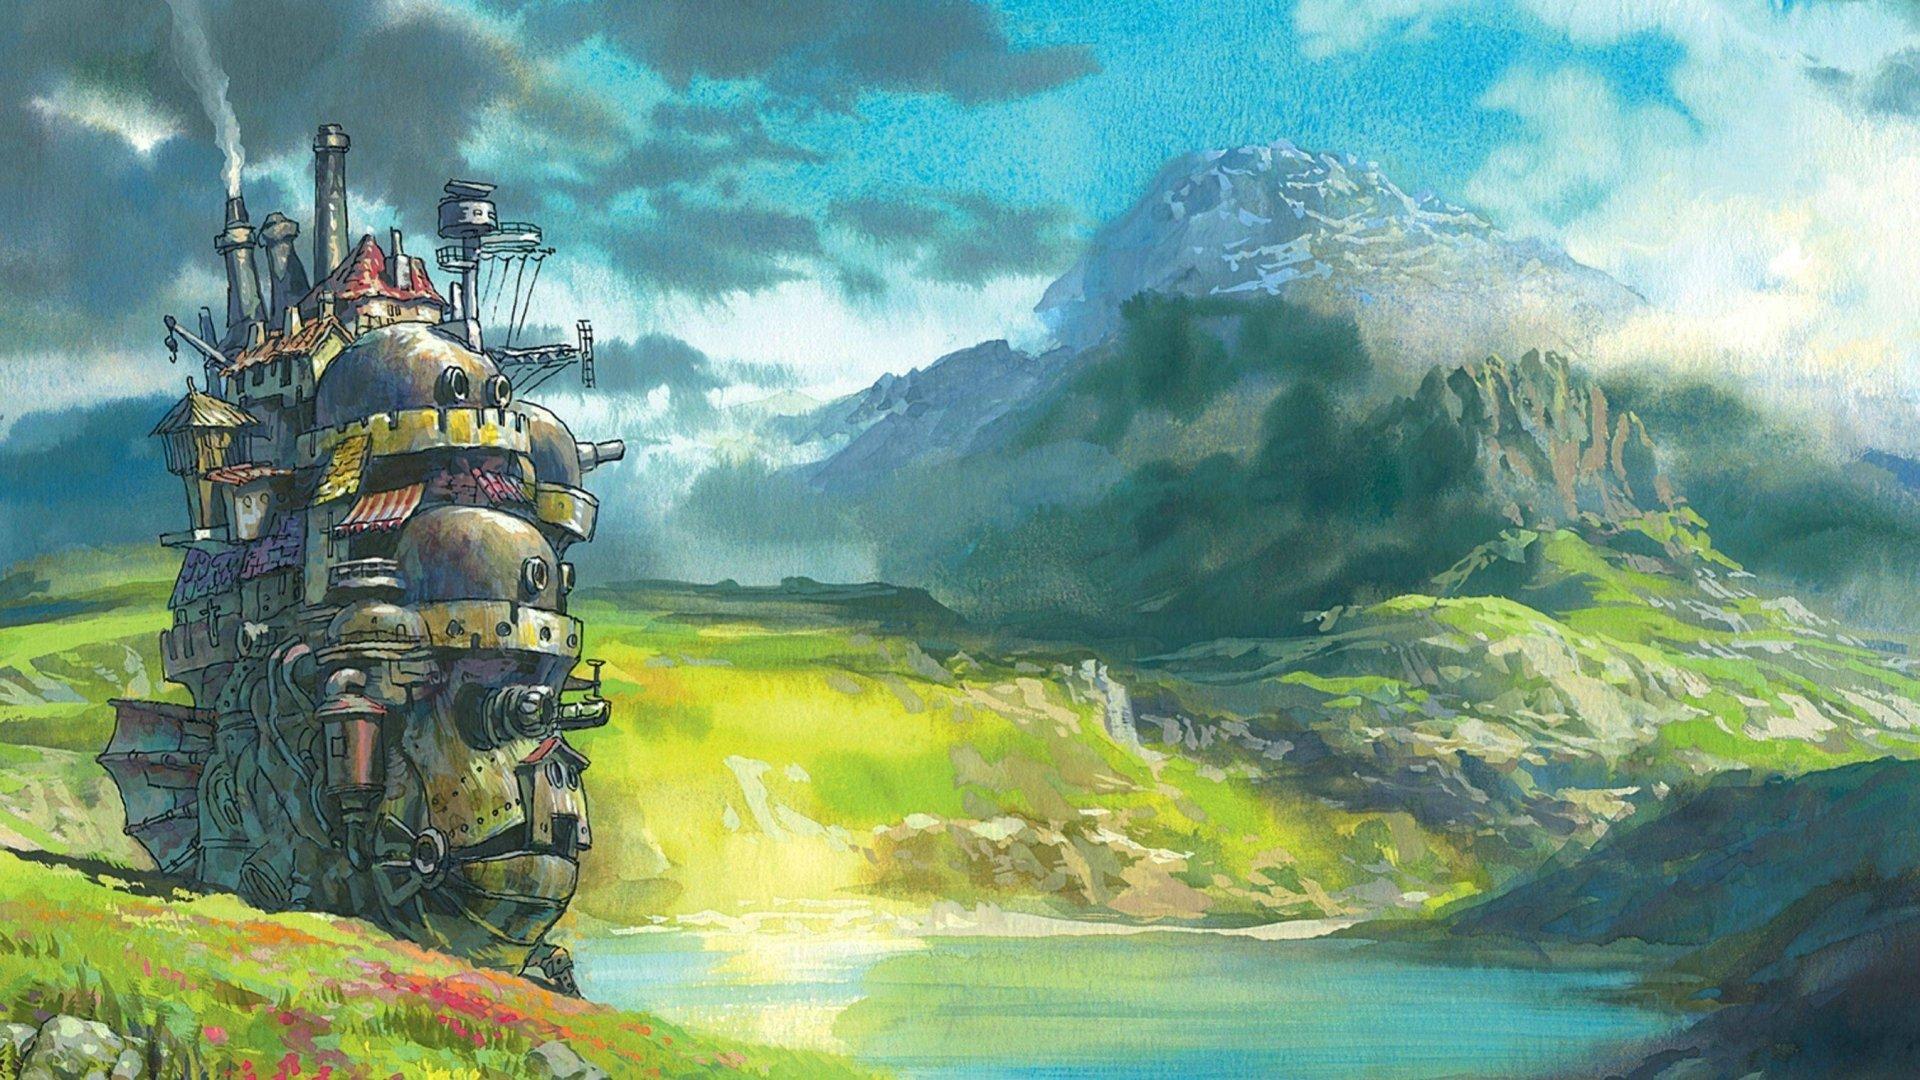 Howls Moving Castle Wallpapers  Top 25 Best Howls Moving Castle  Wallpapers Download